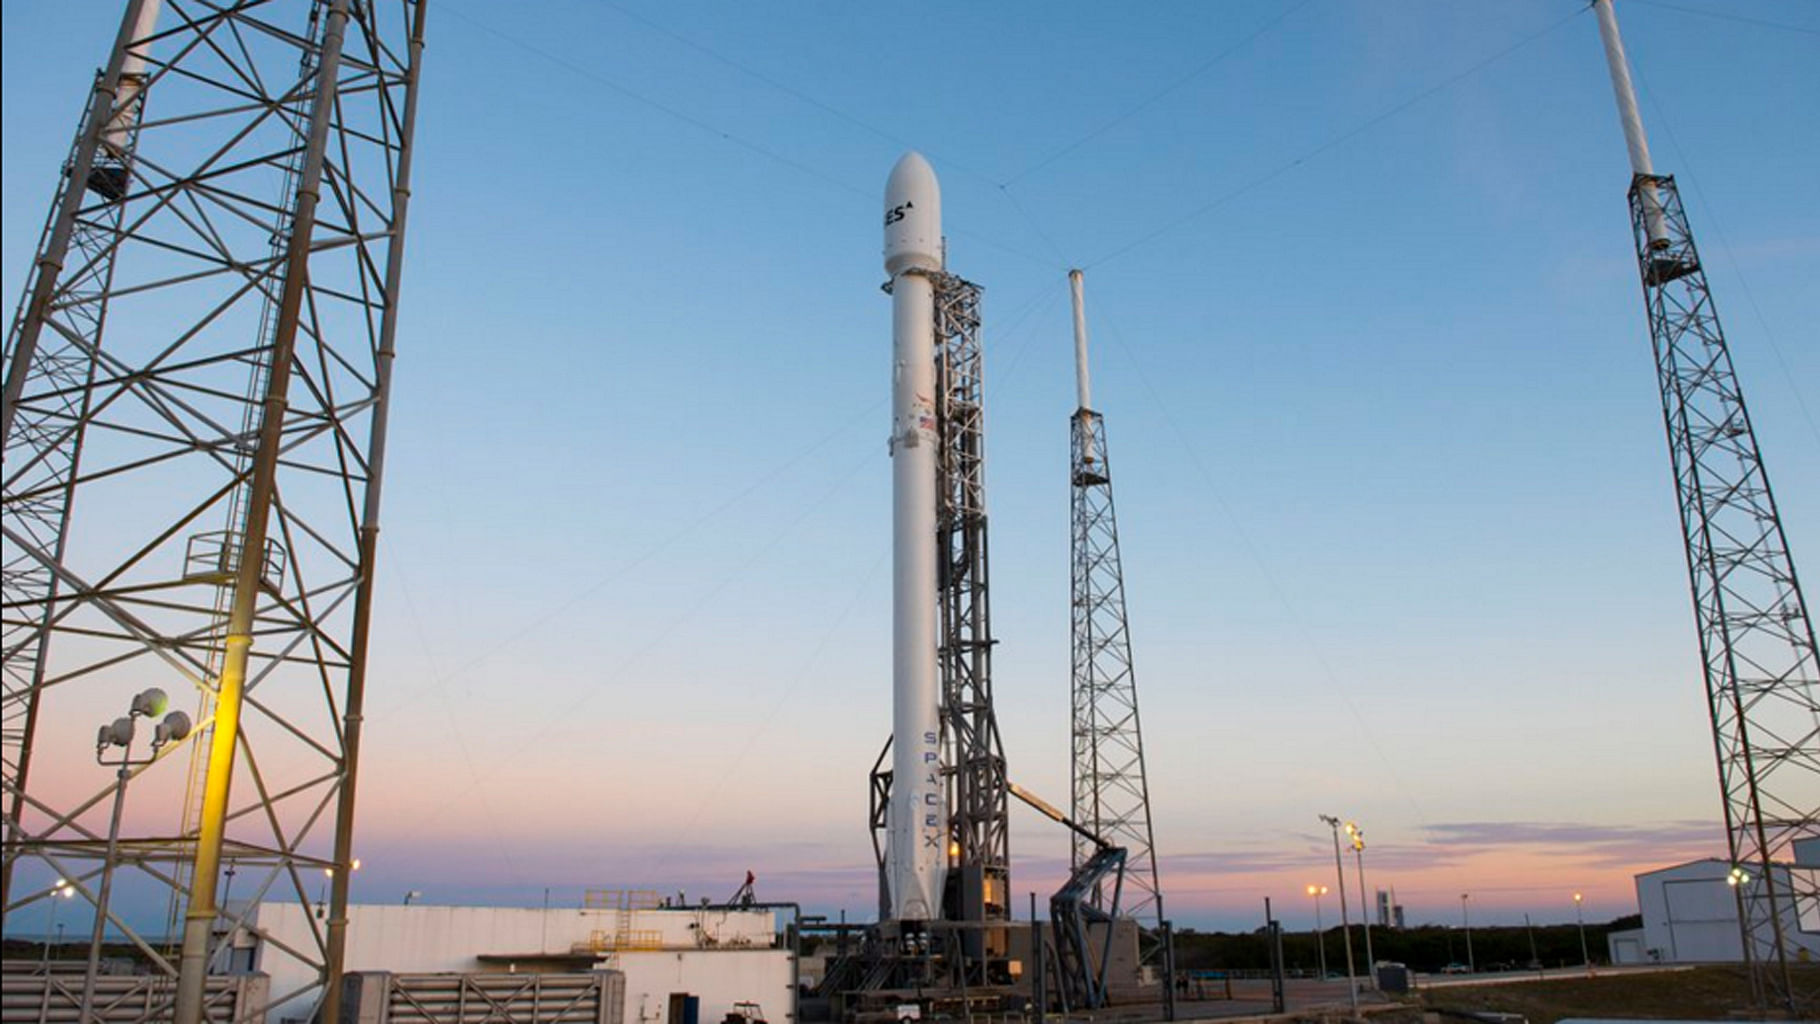 At the last second, Elon Musk’s SpaceX scrubbed plans to launch a Falcon 9 rocket, delaying an attempt to put a satellite into orbit. 